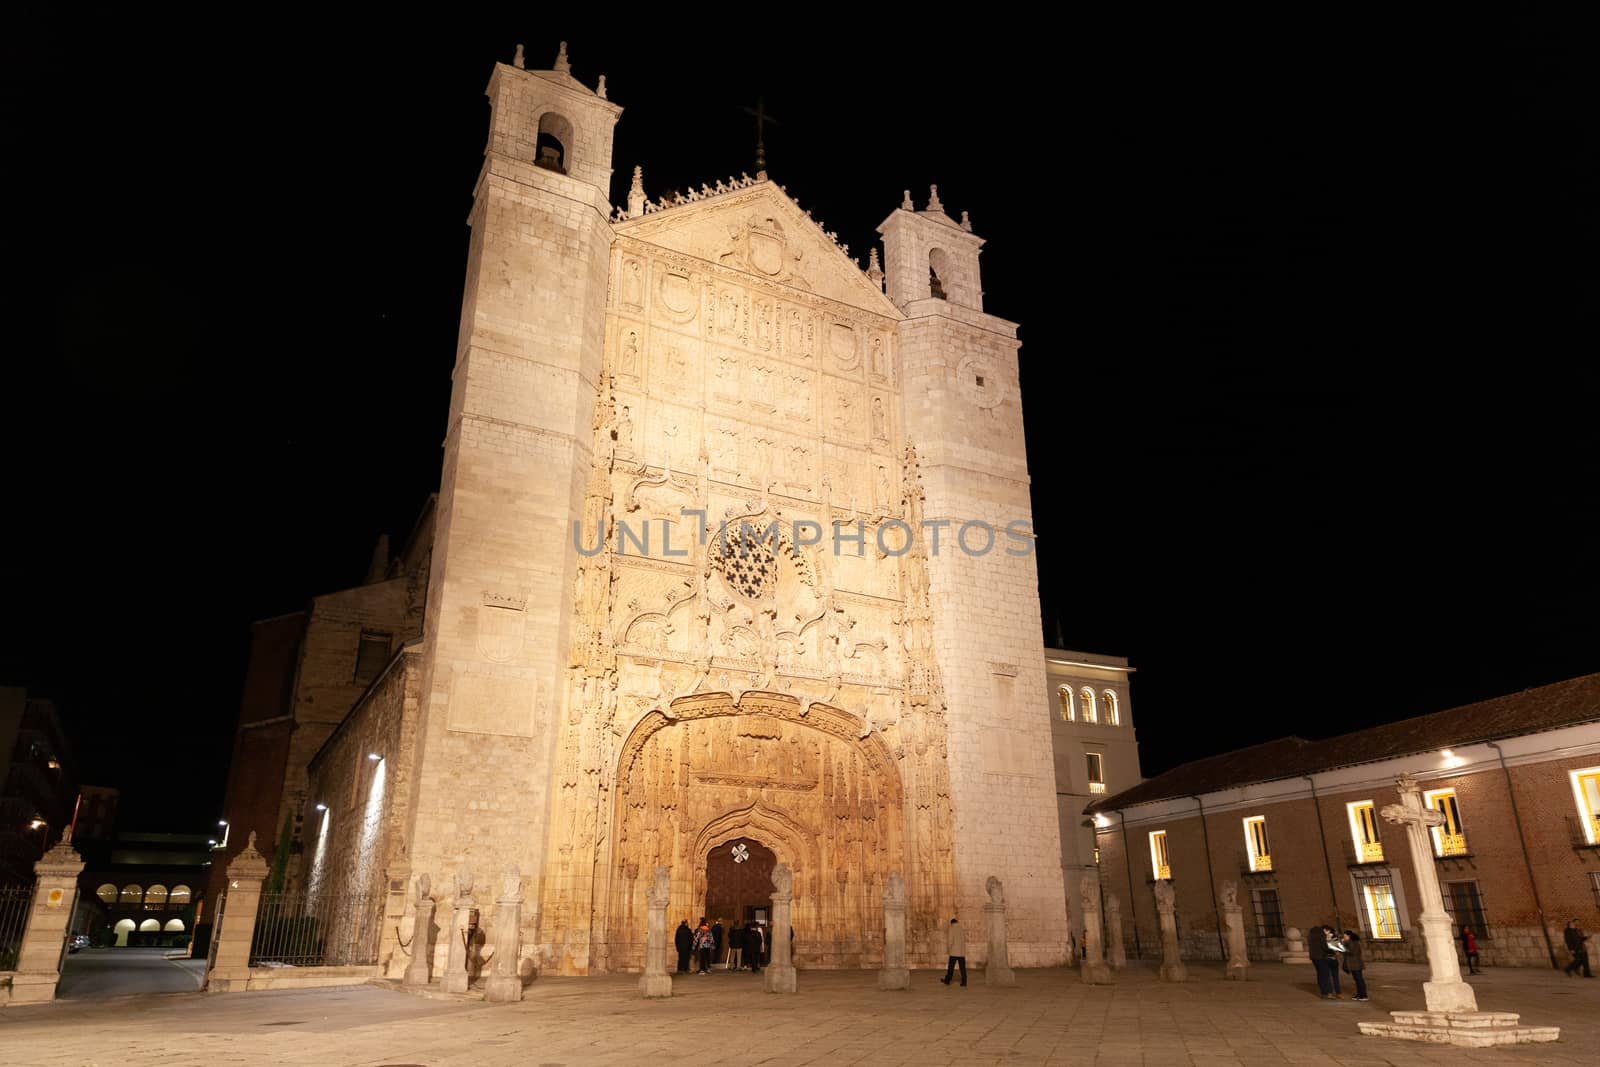 Valladolid, Spain - 8 December 2018: Iglesia de San Pablo (St. Paul's Convent church) front view at night